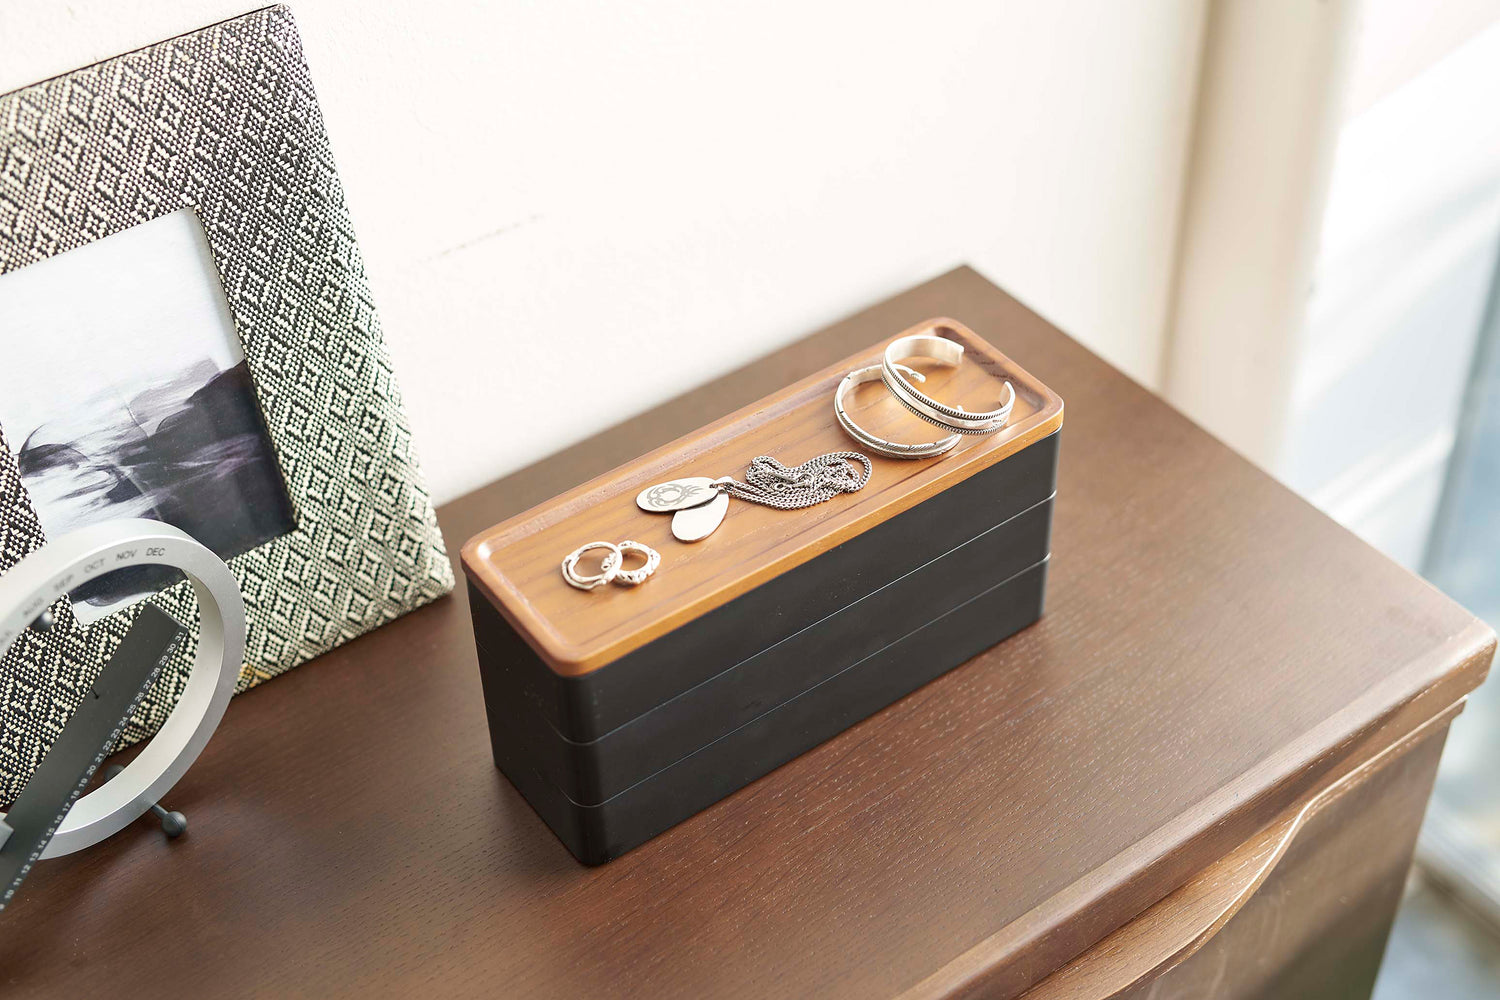 View 14 - Black Stacking Watch and Accessory Case closed with jewelry on a chest of drawers